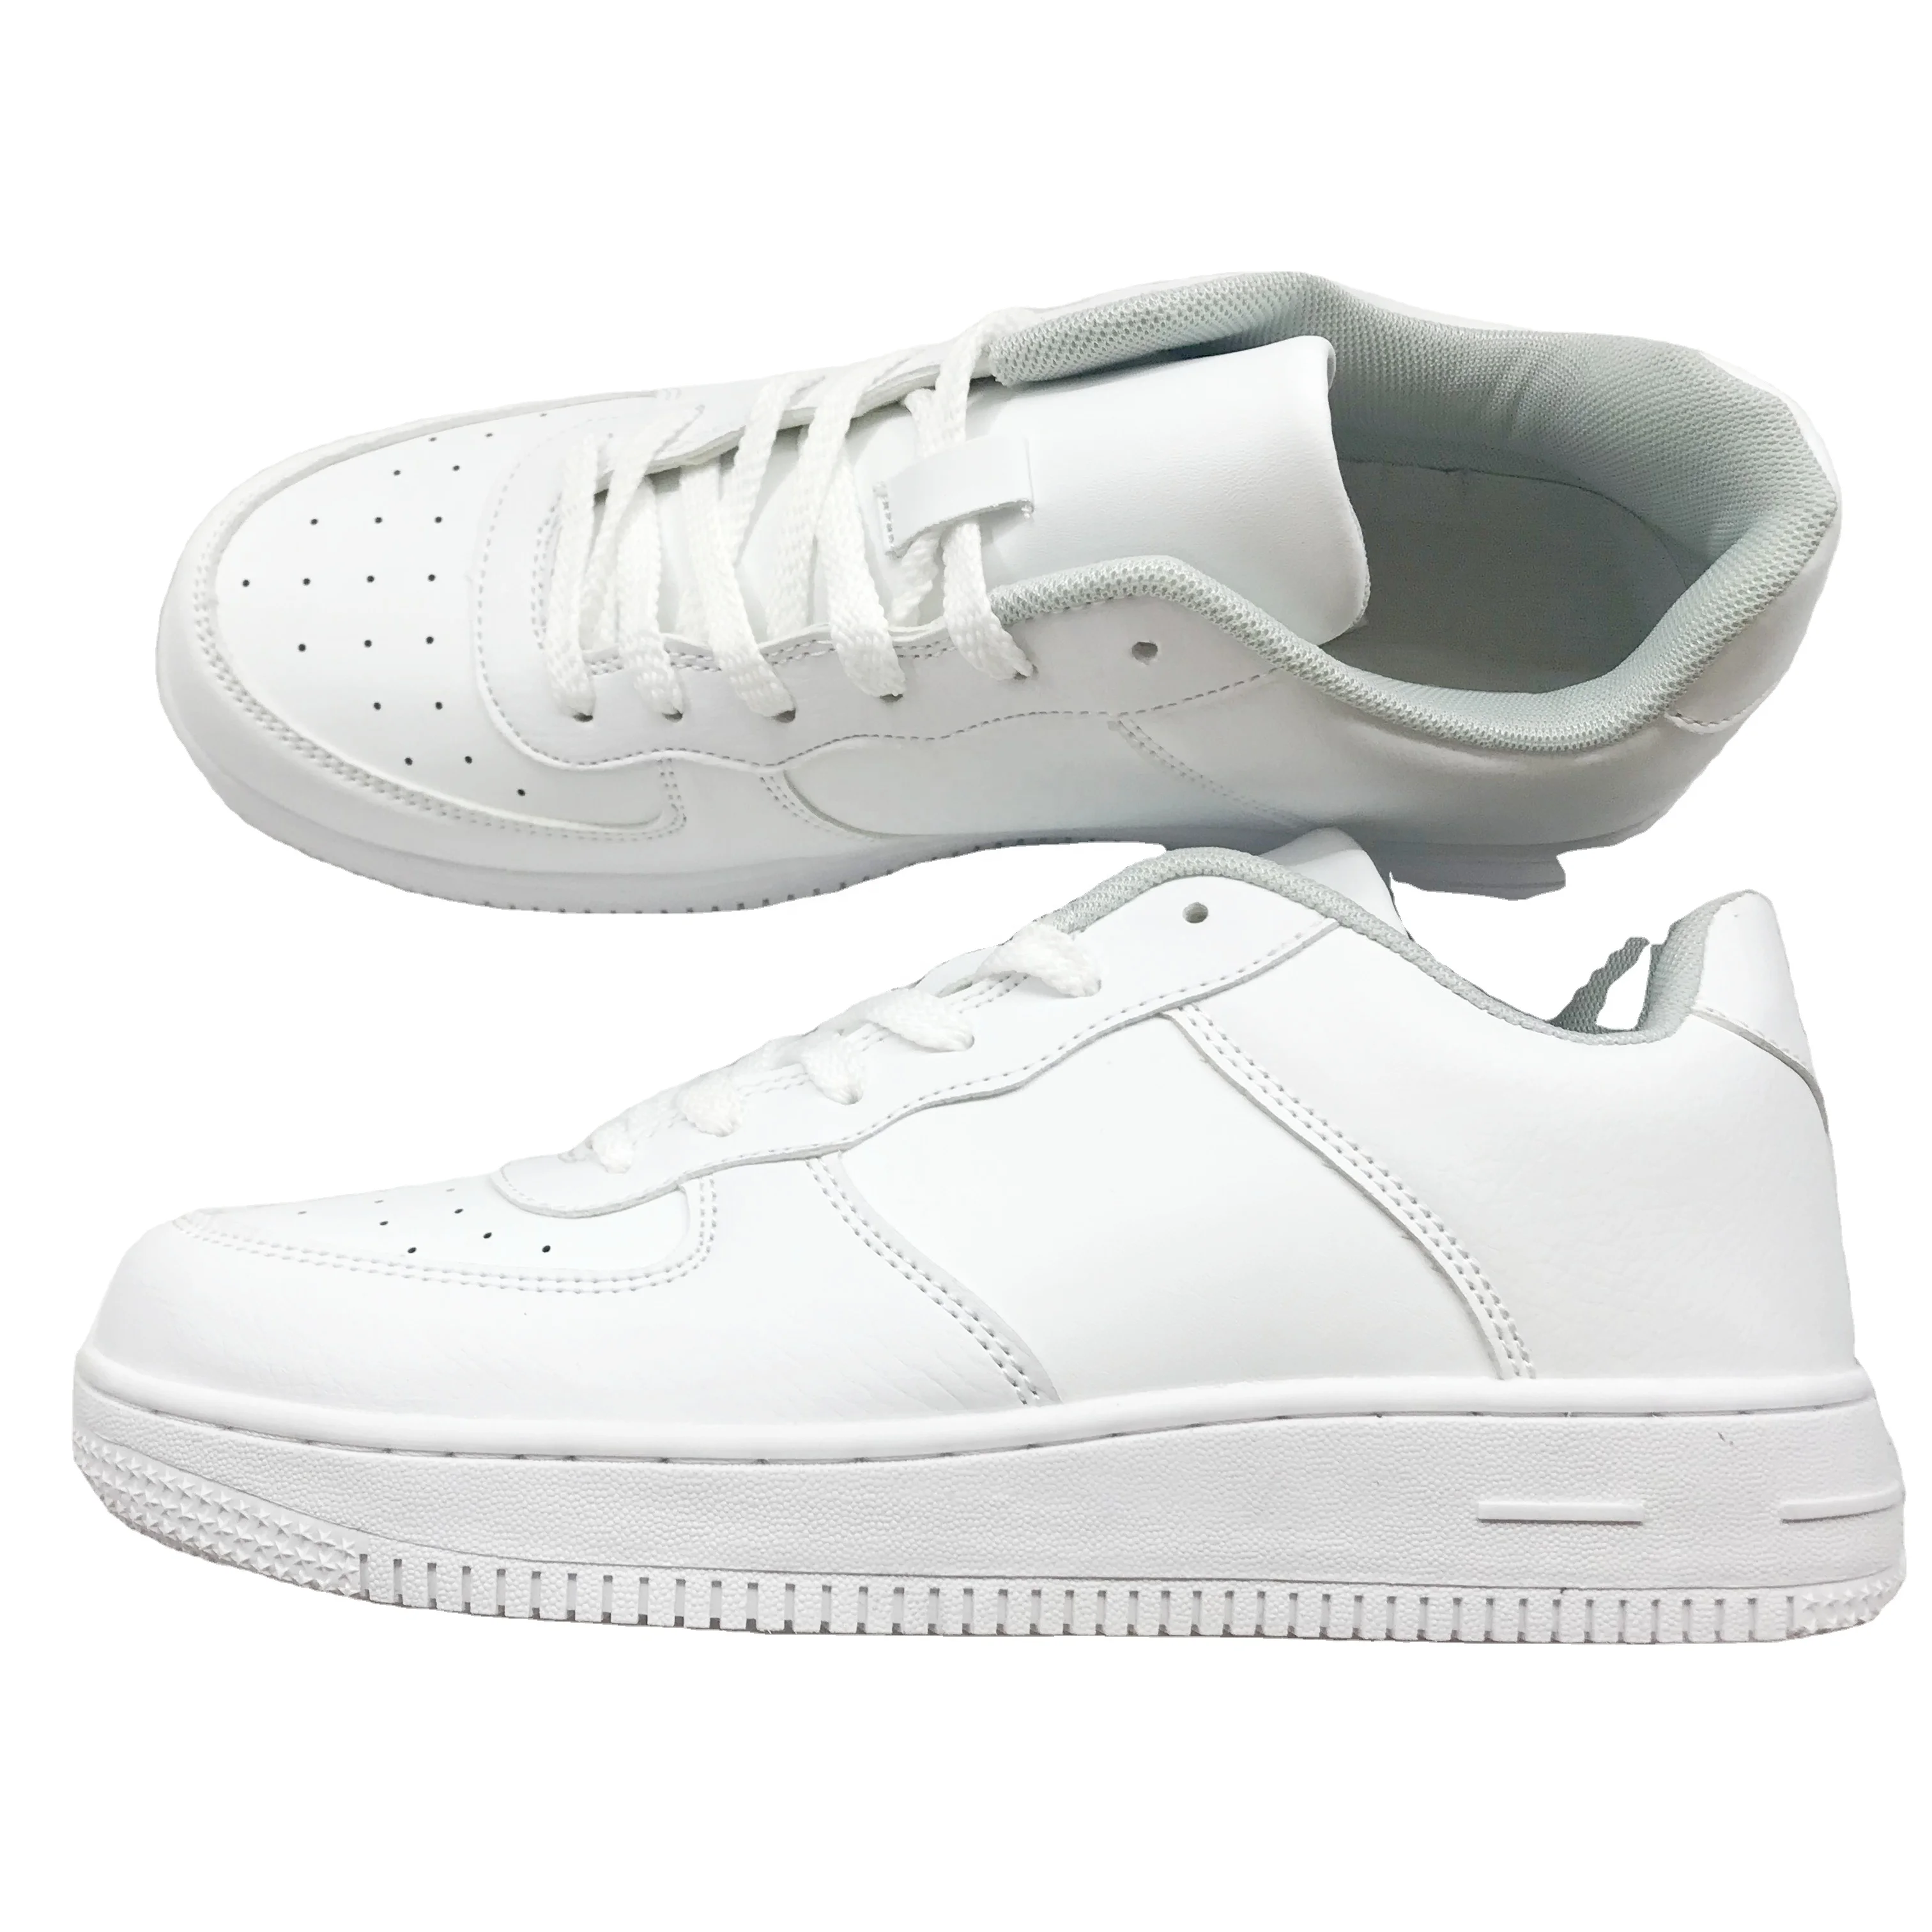 

Top quality Branded A Fashion White Force 1 air shoes rubber top grain leather upper Low cut Sneakers Mens Womens Shoes